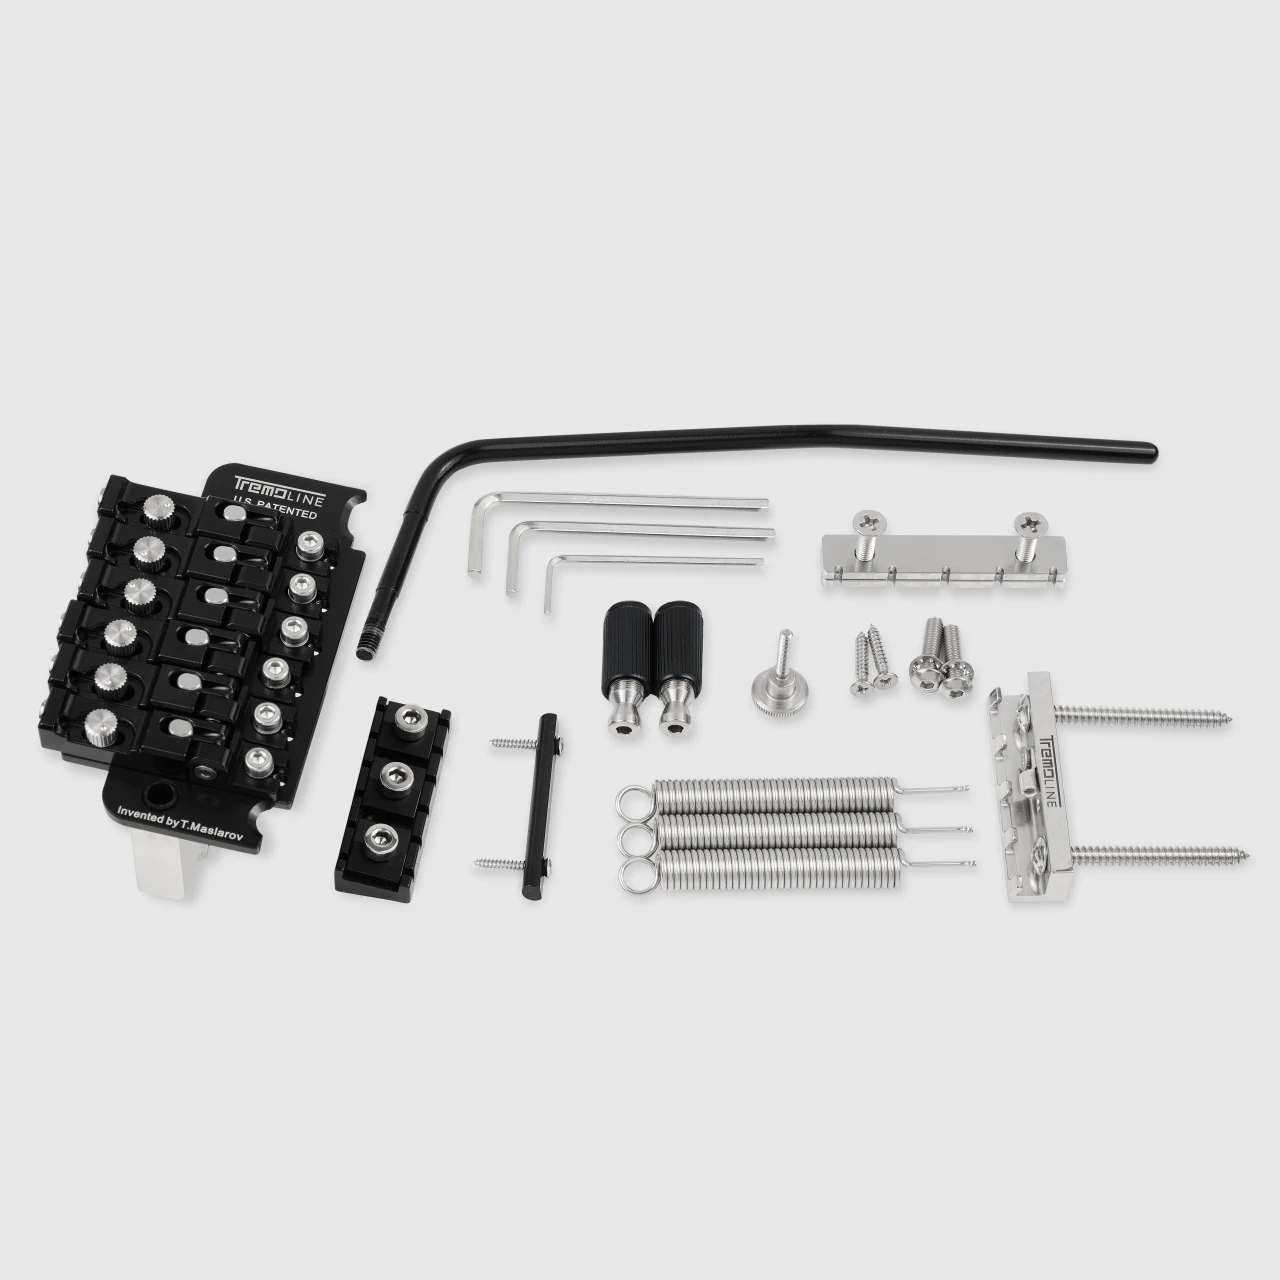 <img src=”Tremoline-Tremolo-system-flat-top-FT36T-R3-BS_3” width="1280" height="1280" alt=”All parts of the Tremoline FT36M double locking tremolo set” />